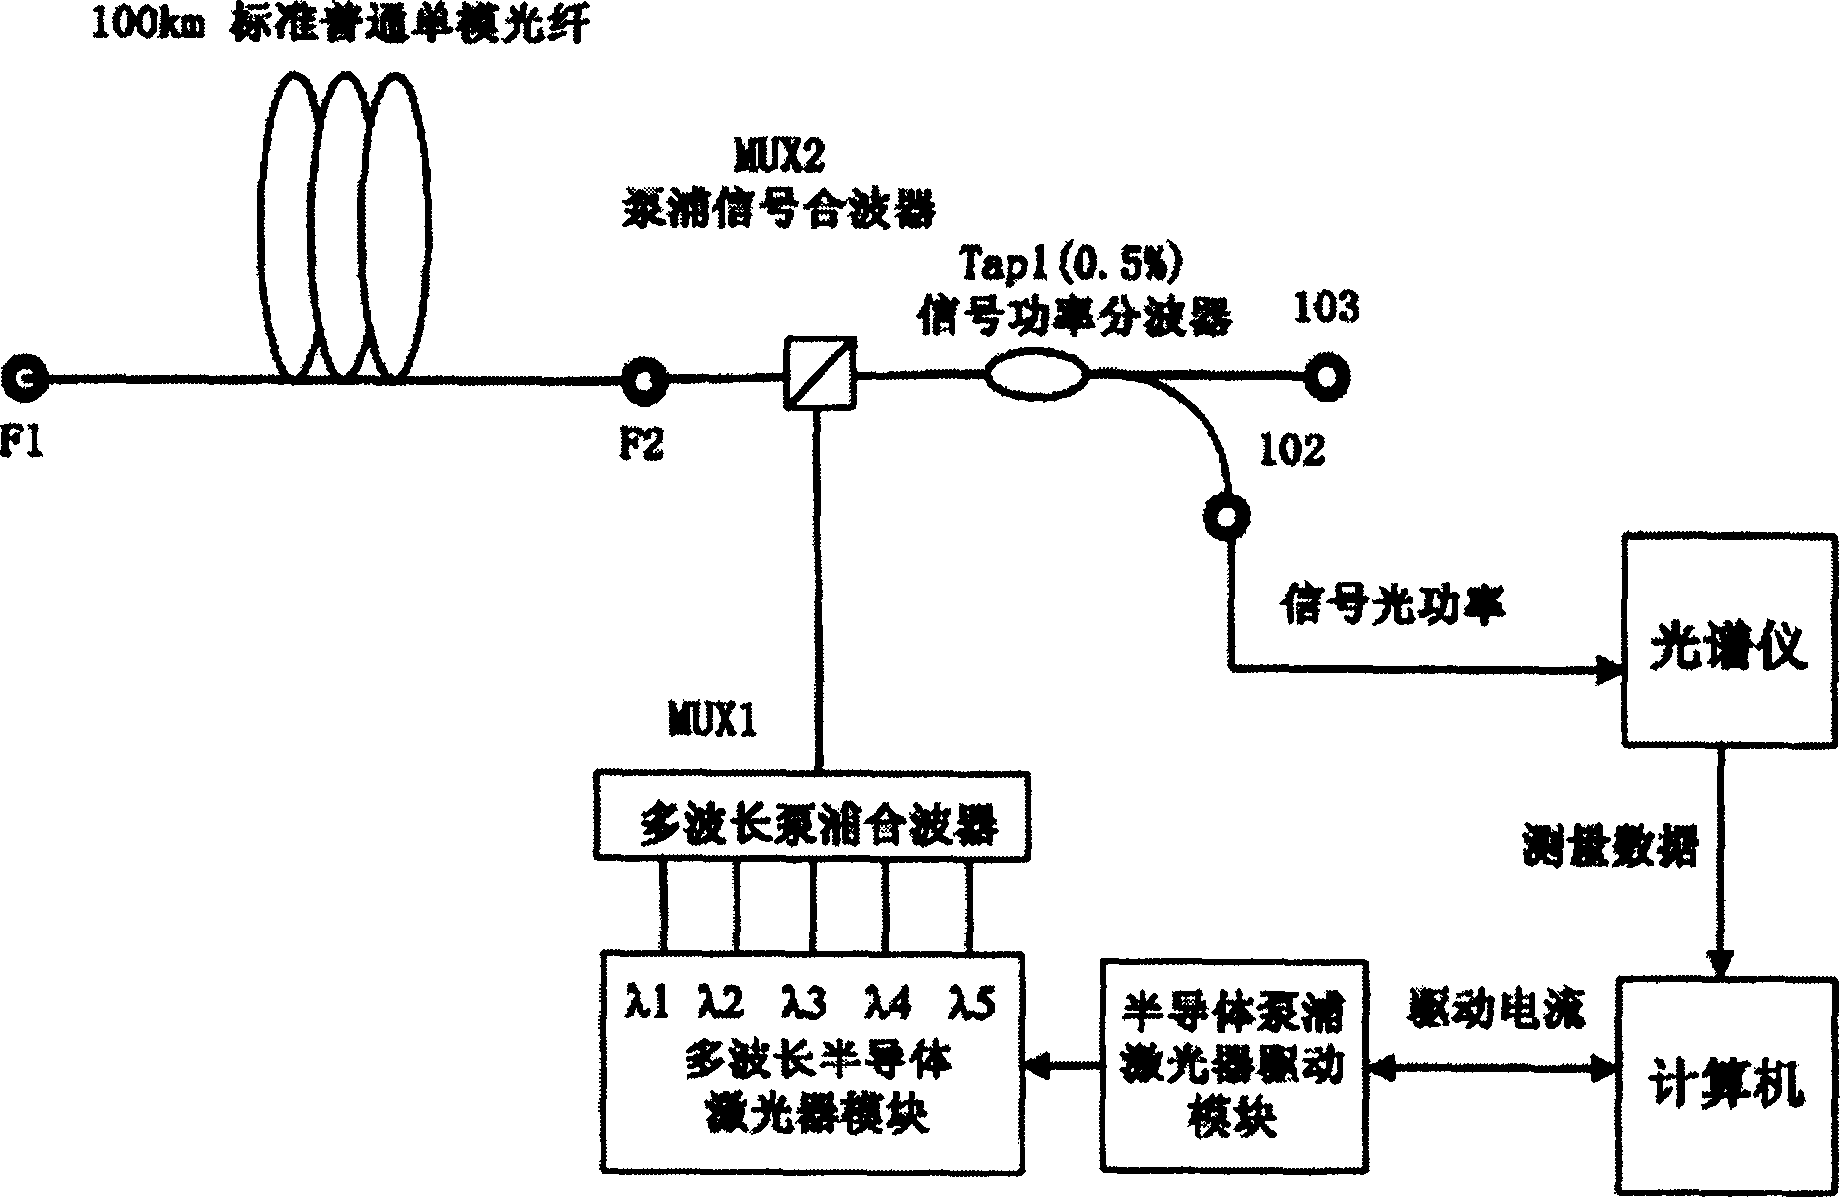 Channel power equalizing method for optical fiber Raman amplifier for wave division multiplexing communication system